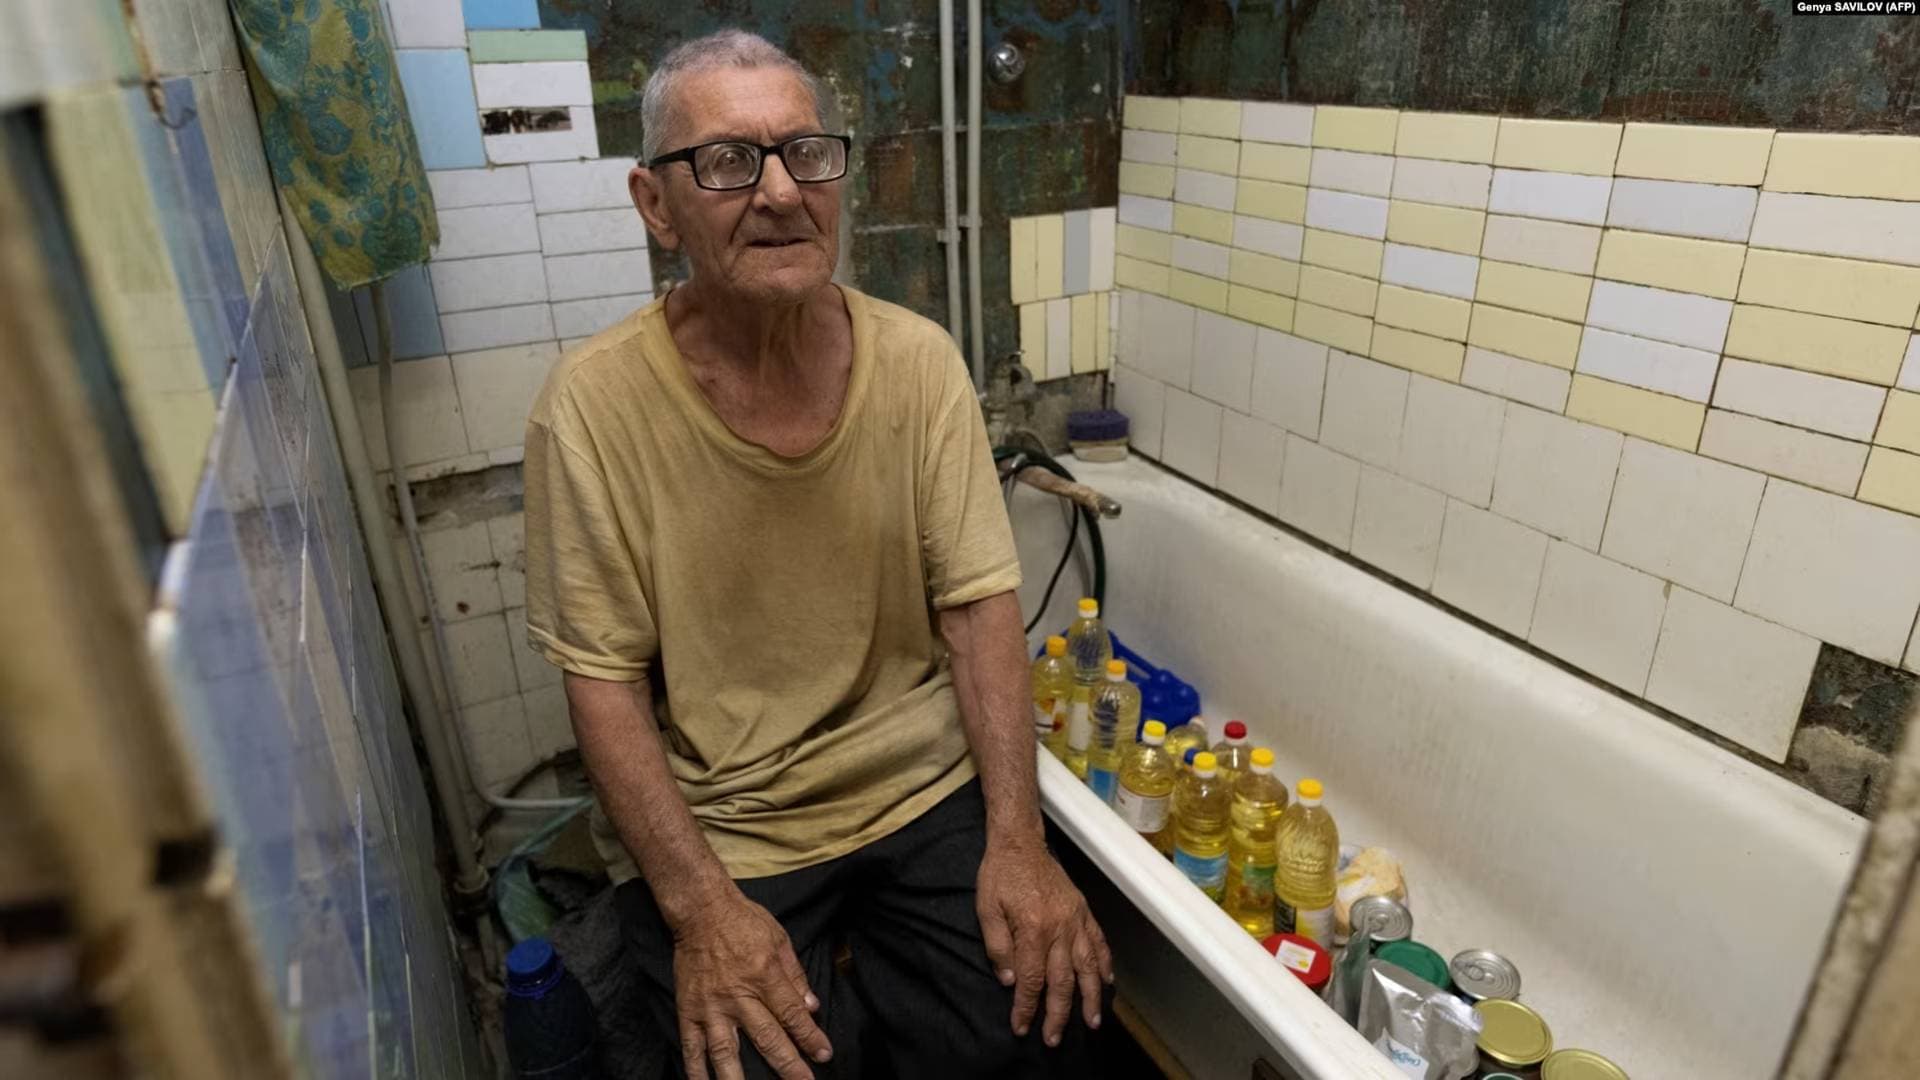 Viktor Grozdov sits in the bathroom of his damaged home in the eastern Ukrainian town of Avdiyivka